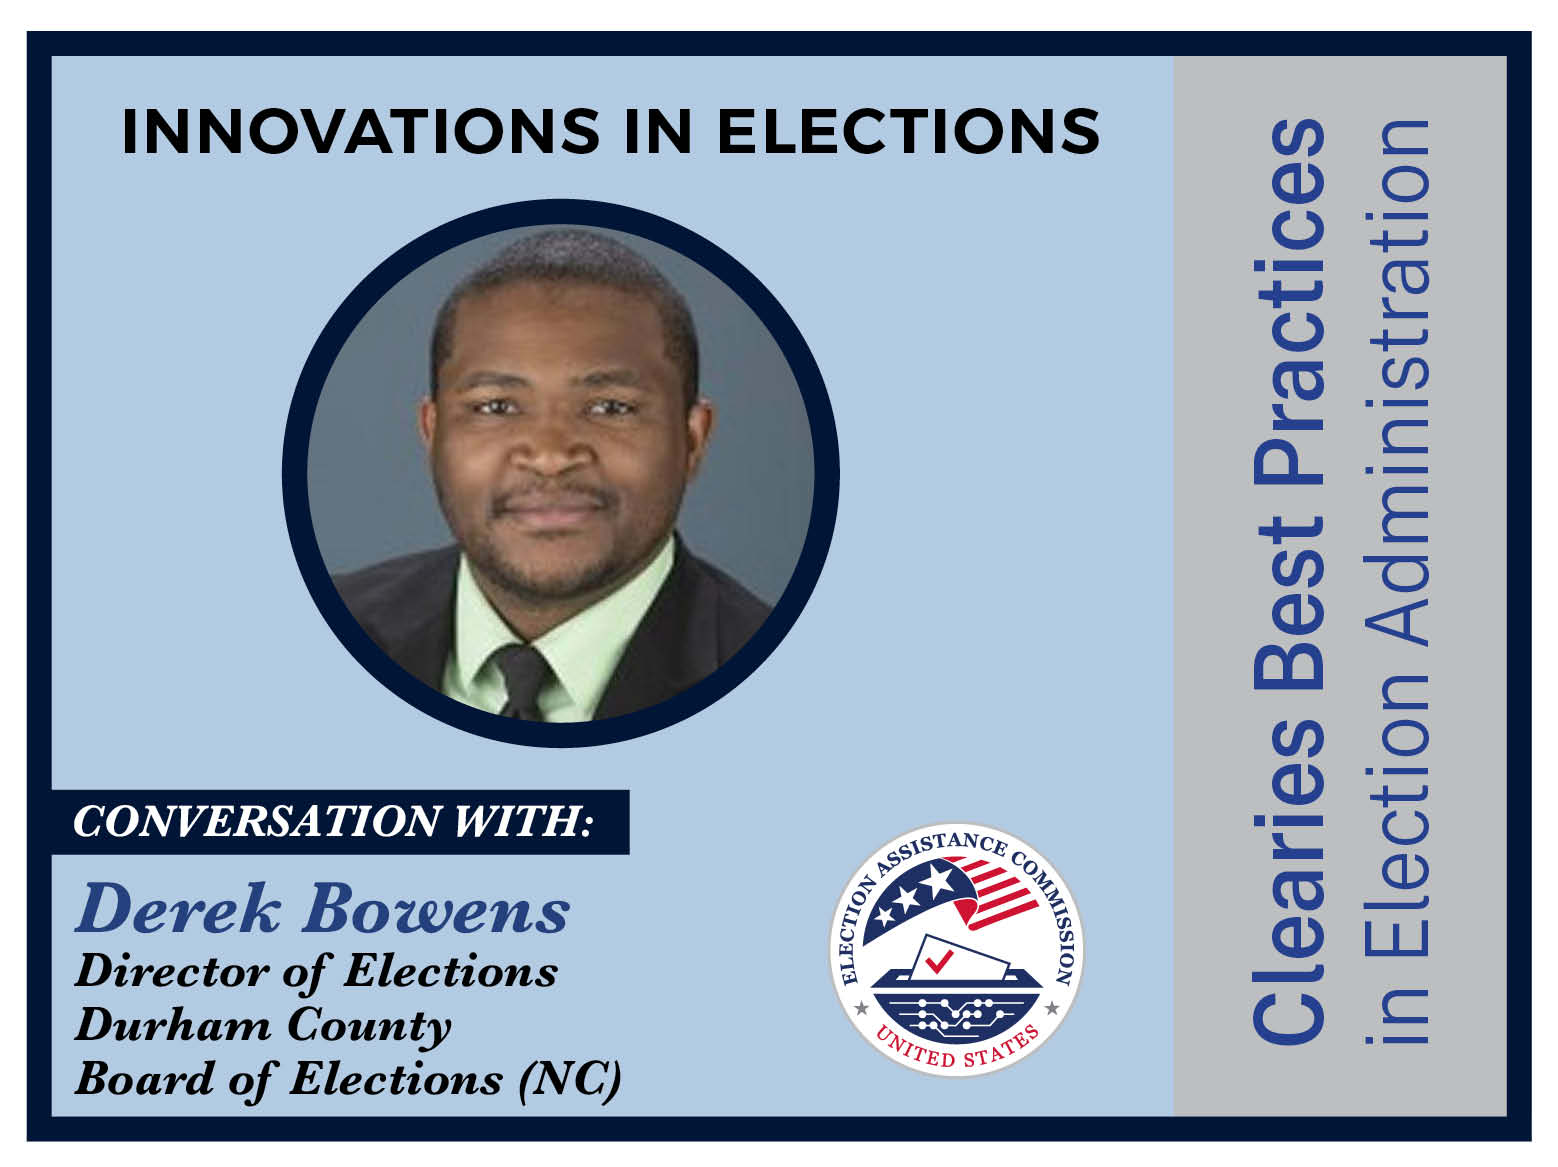 Clearies Best Practices conversation with Derek Bowens Director of Elections Durham County Board of Elections